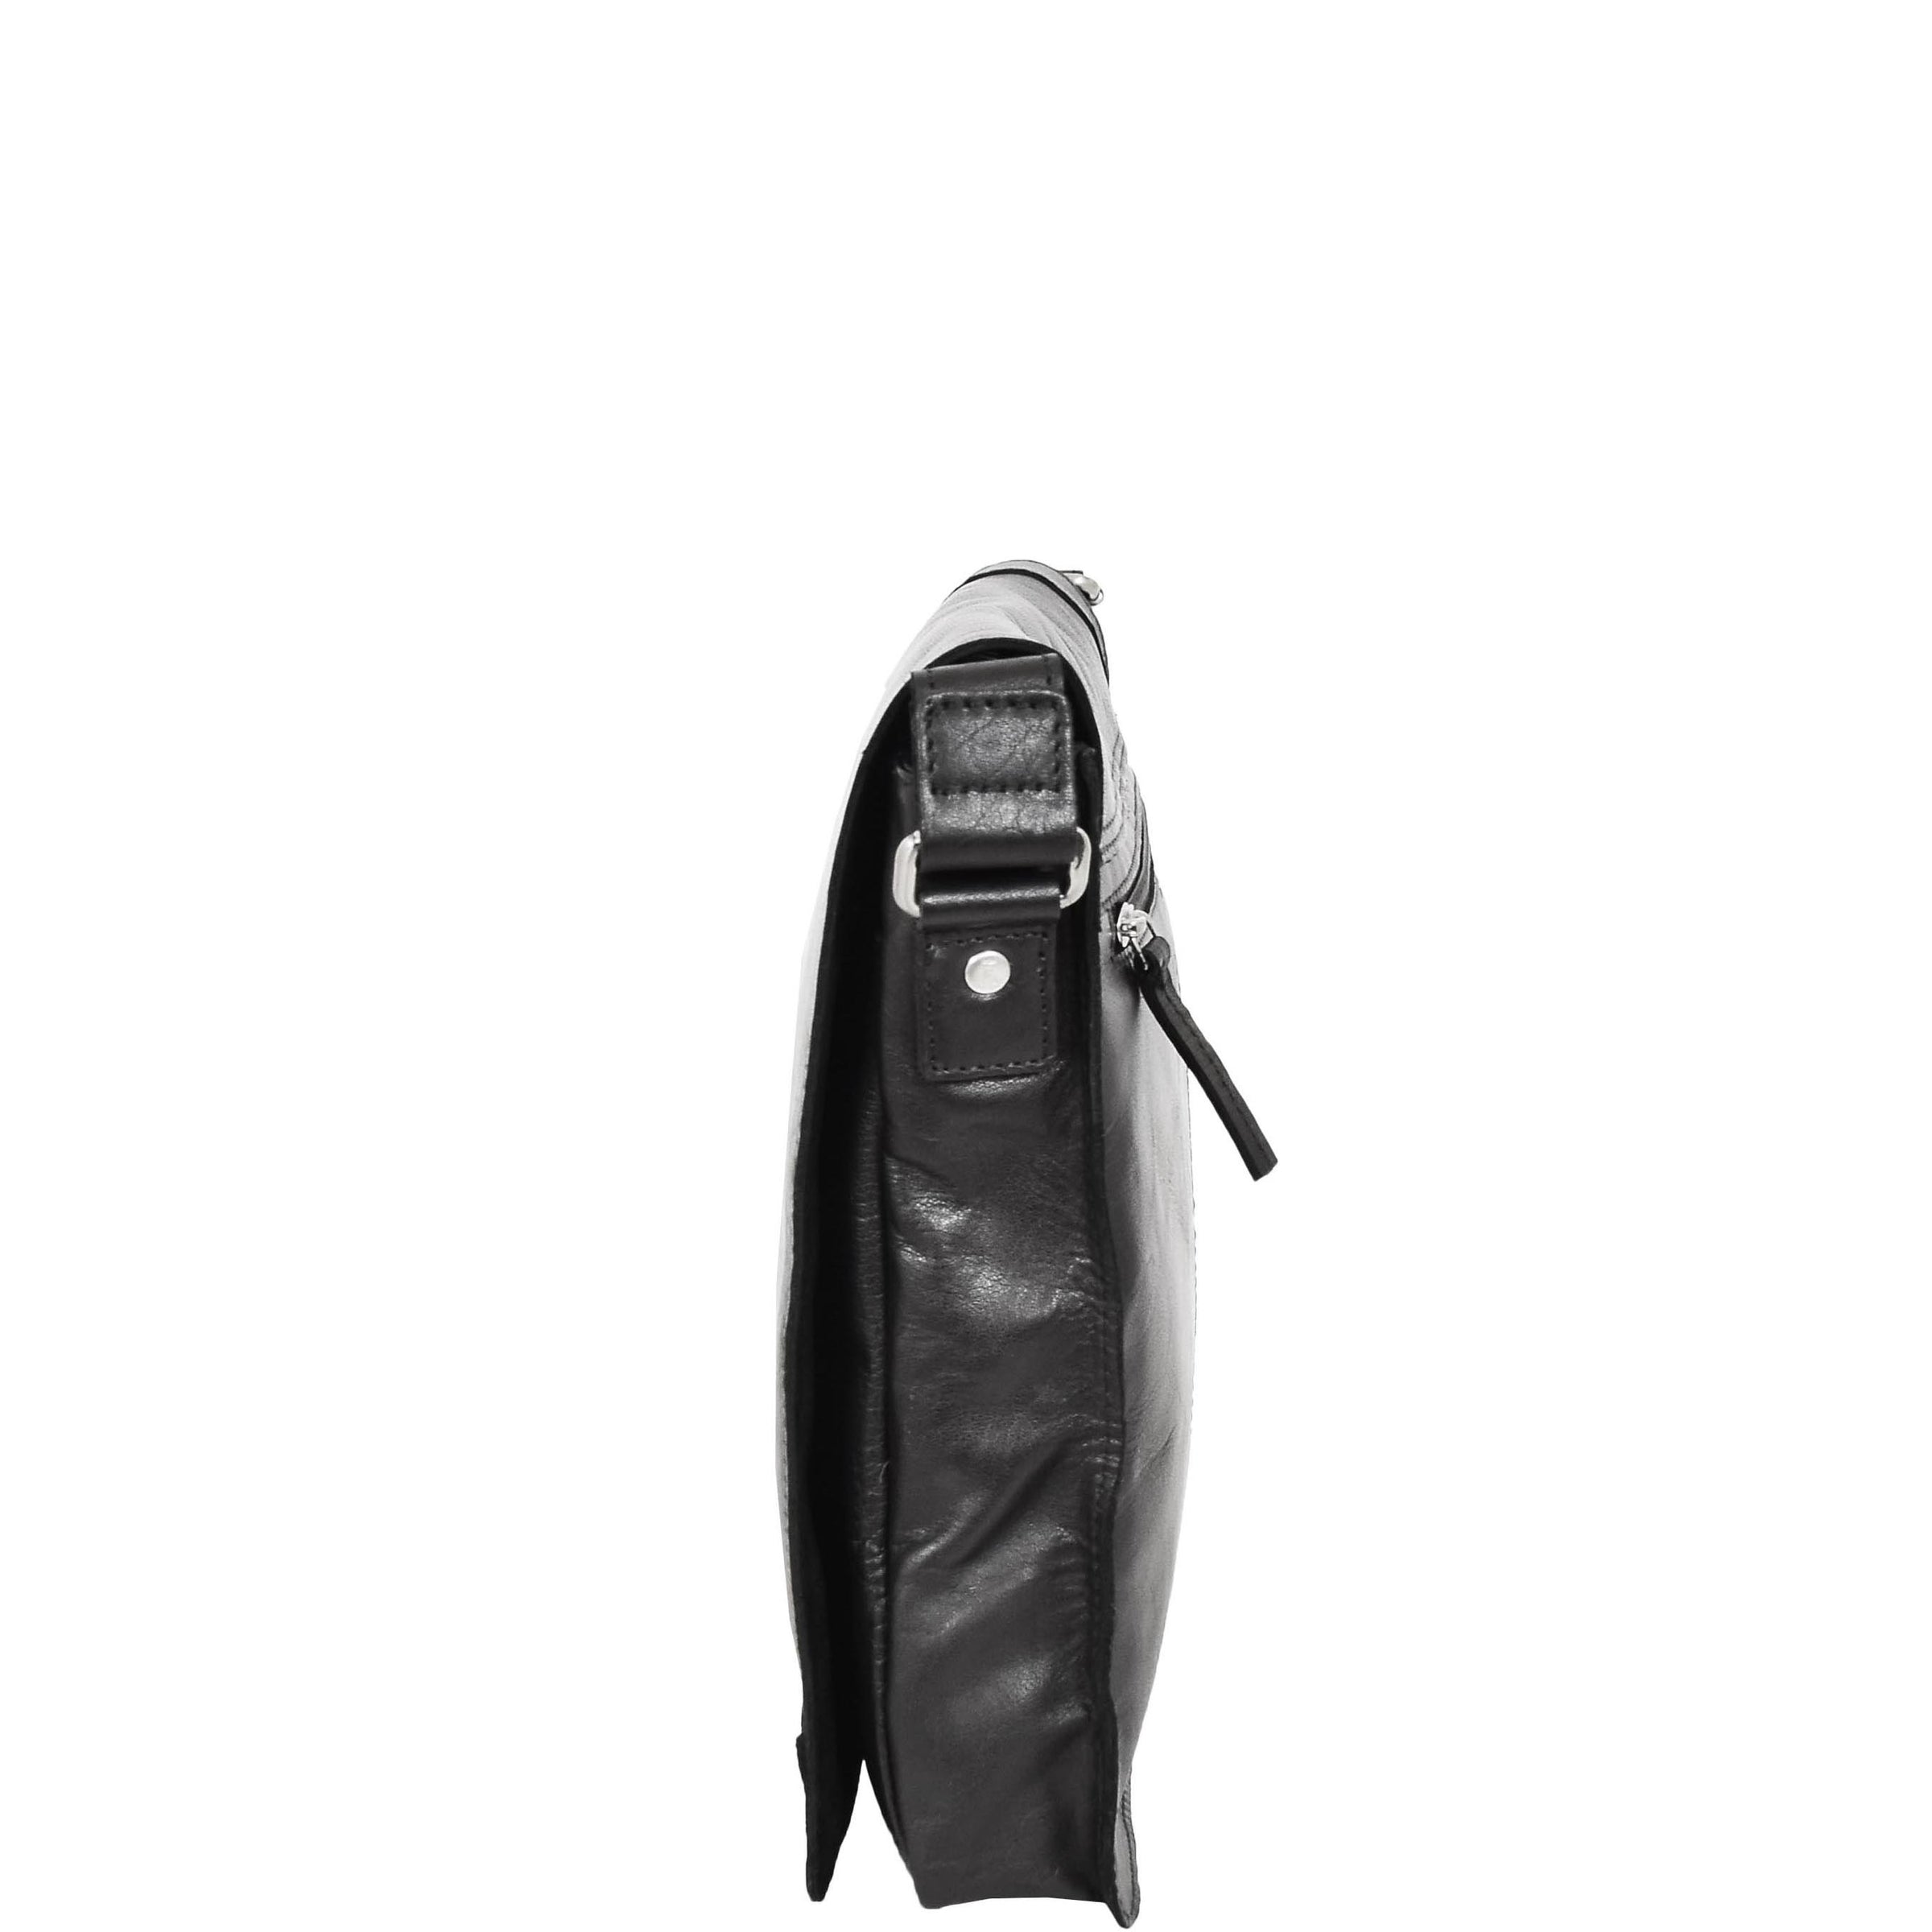 Mens Leather Flap Over Cross Body Bag Black | House of Leather